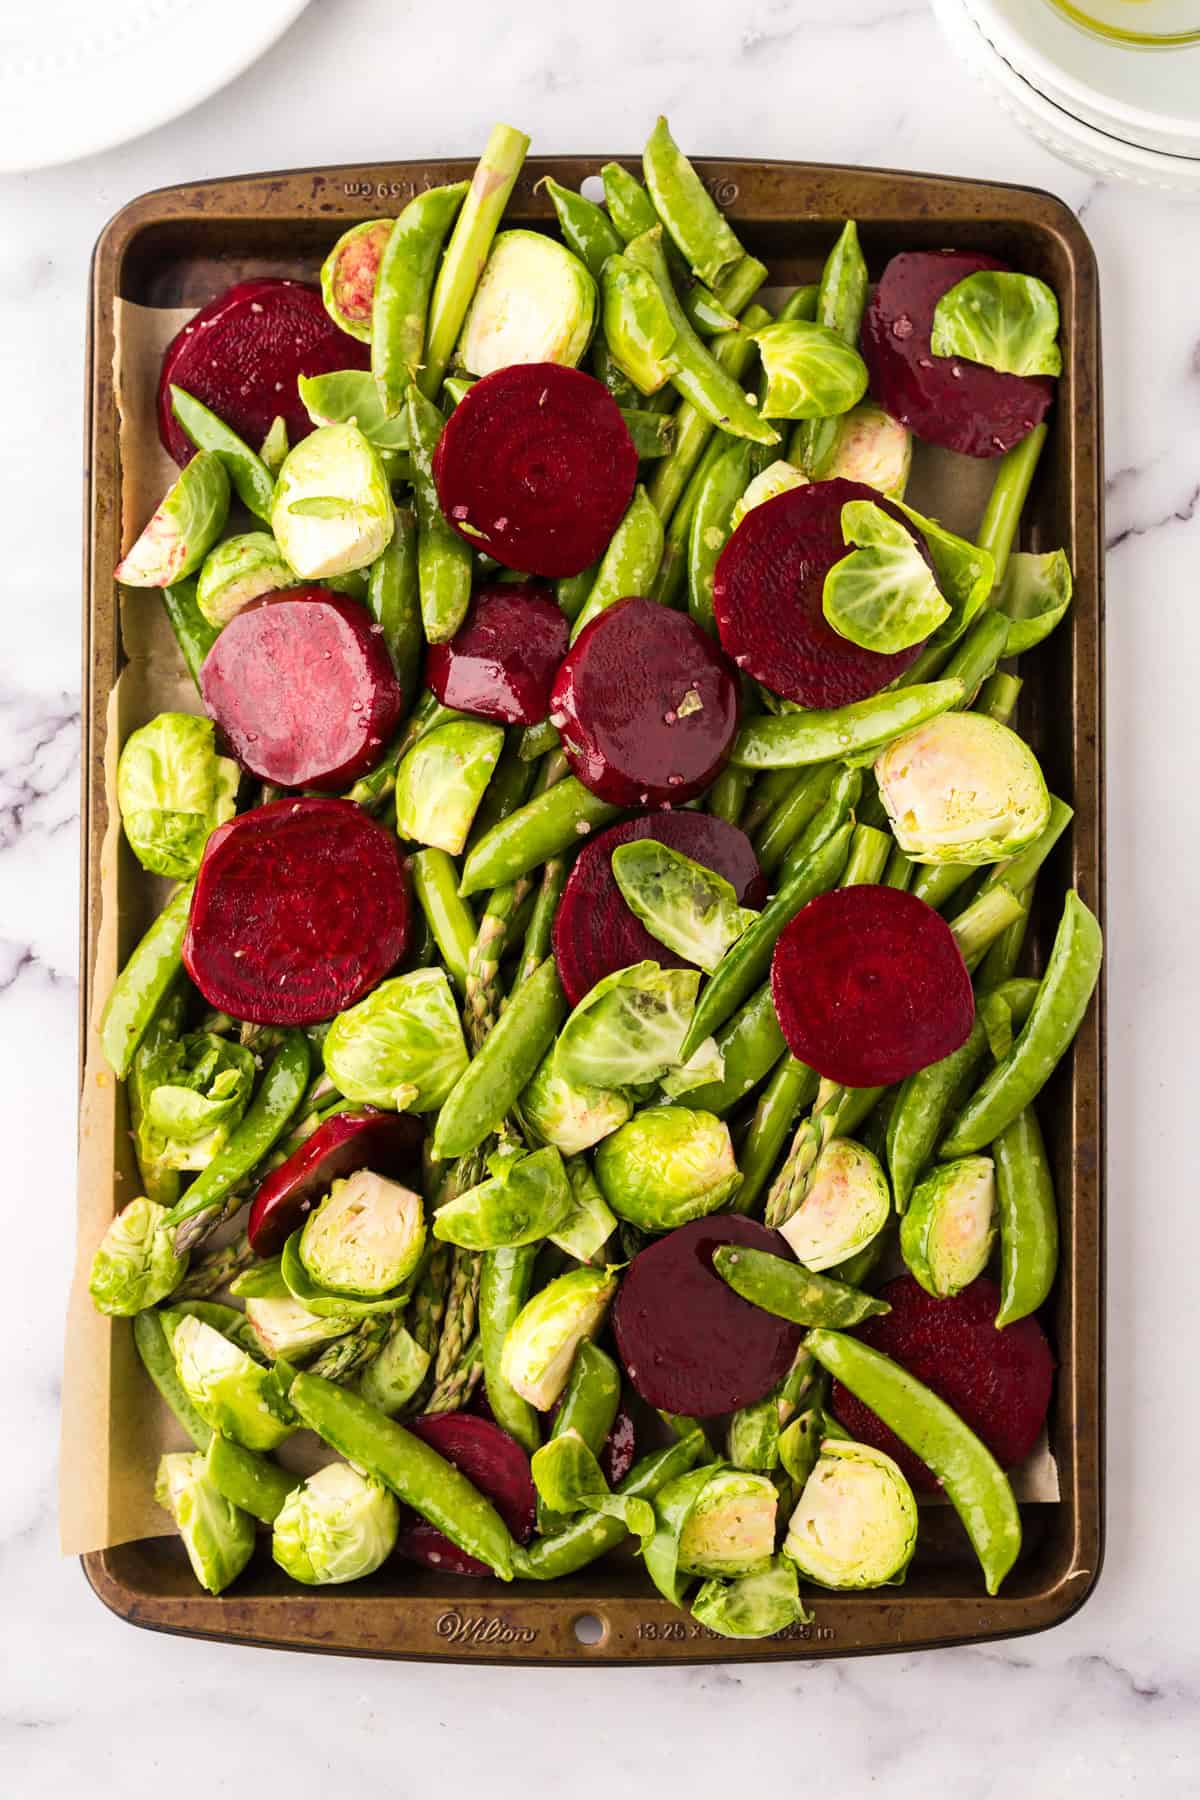 raw spring vegetables on a baking dish before being baked and roasted.